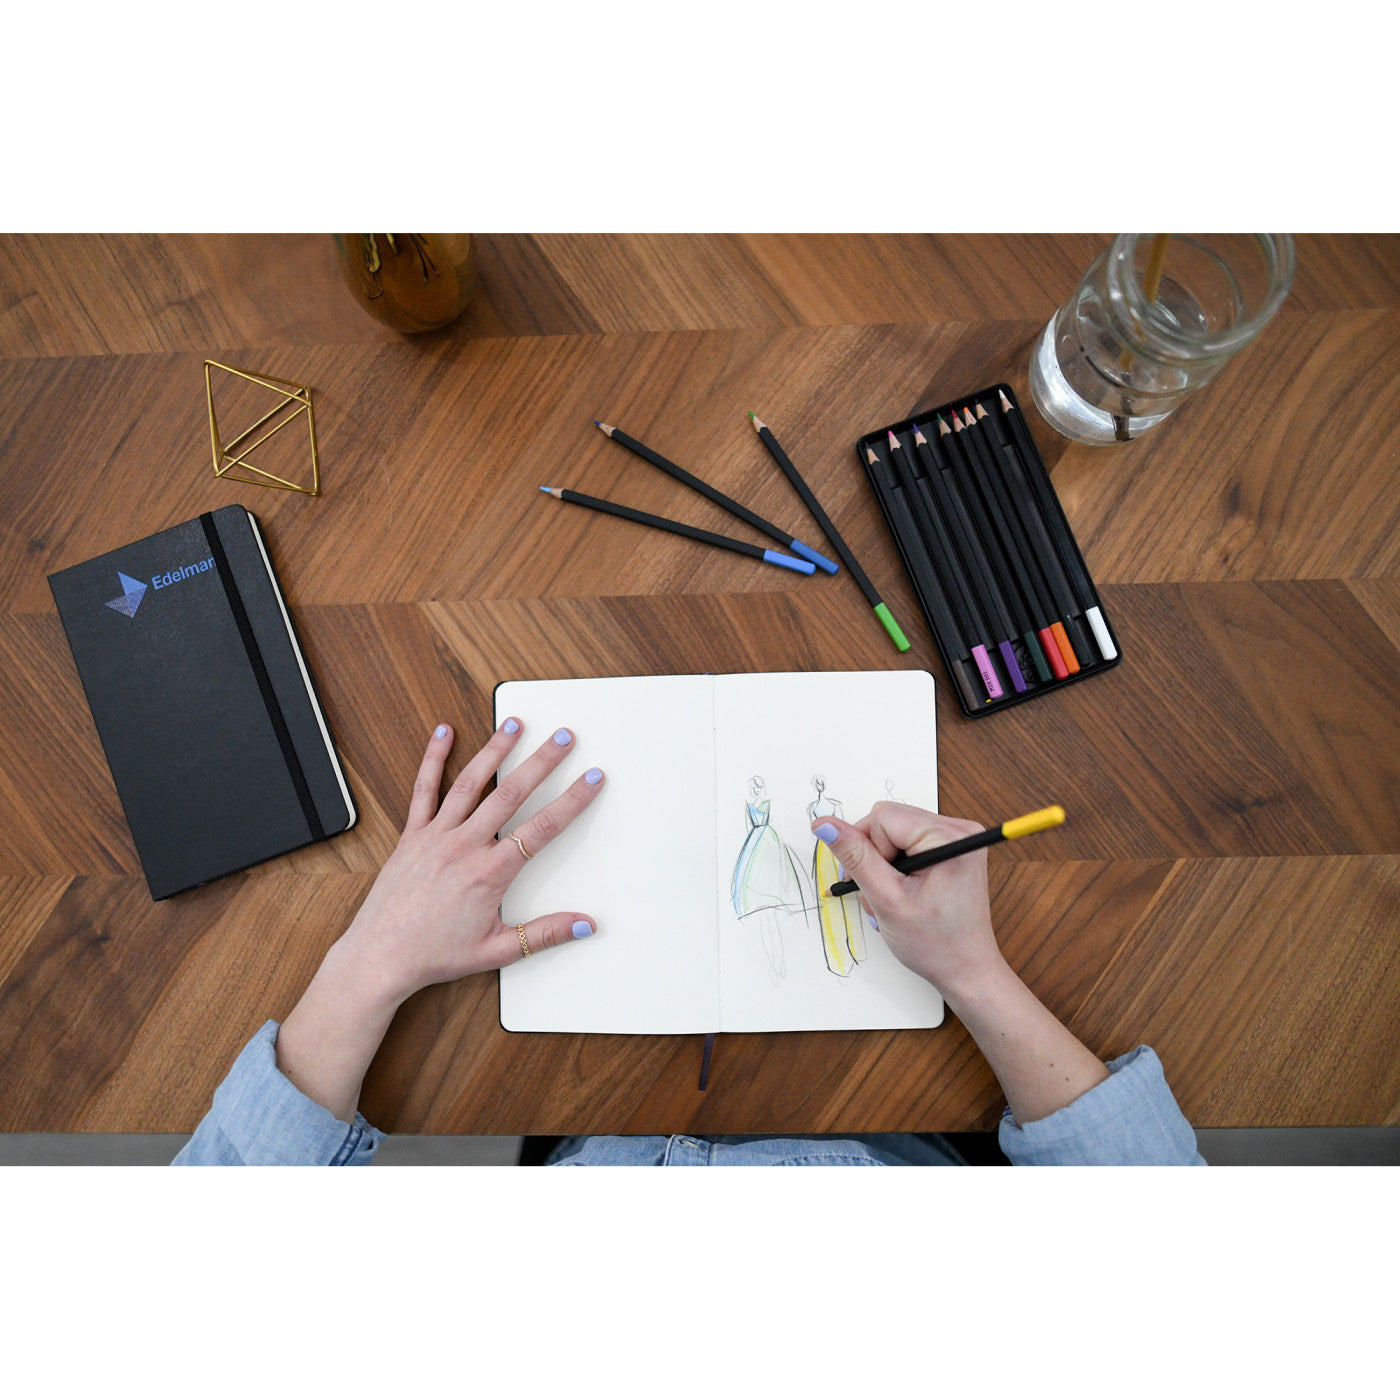 Artiste Winery - Products - Moleskine Coloring Kit and Sketching Kit